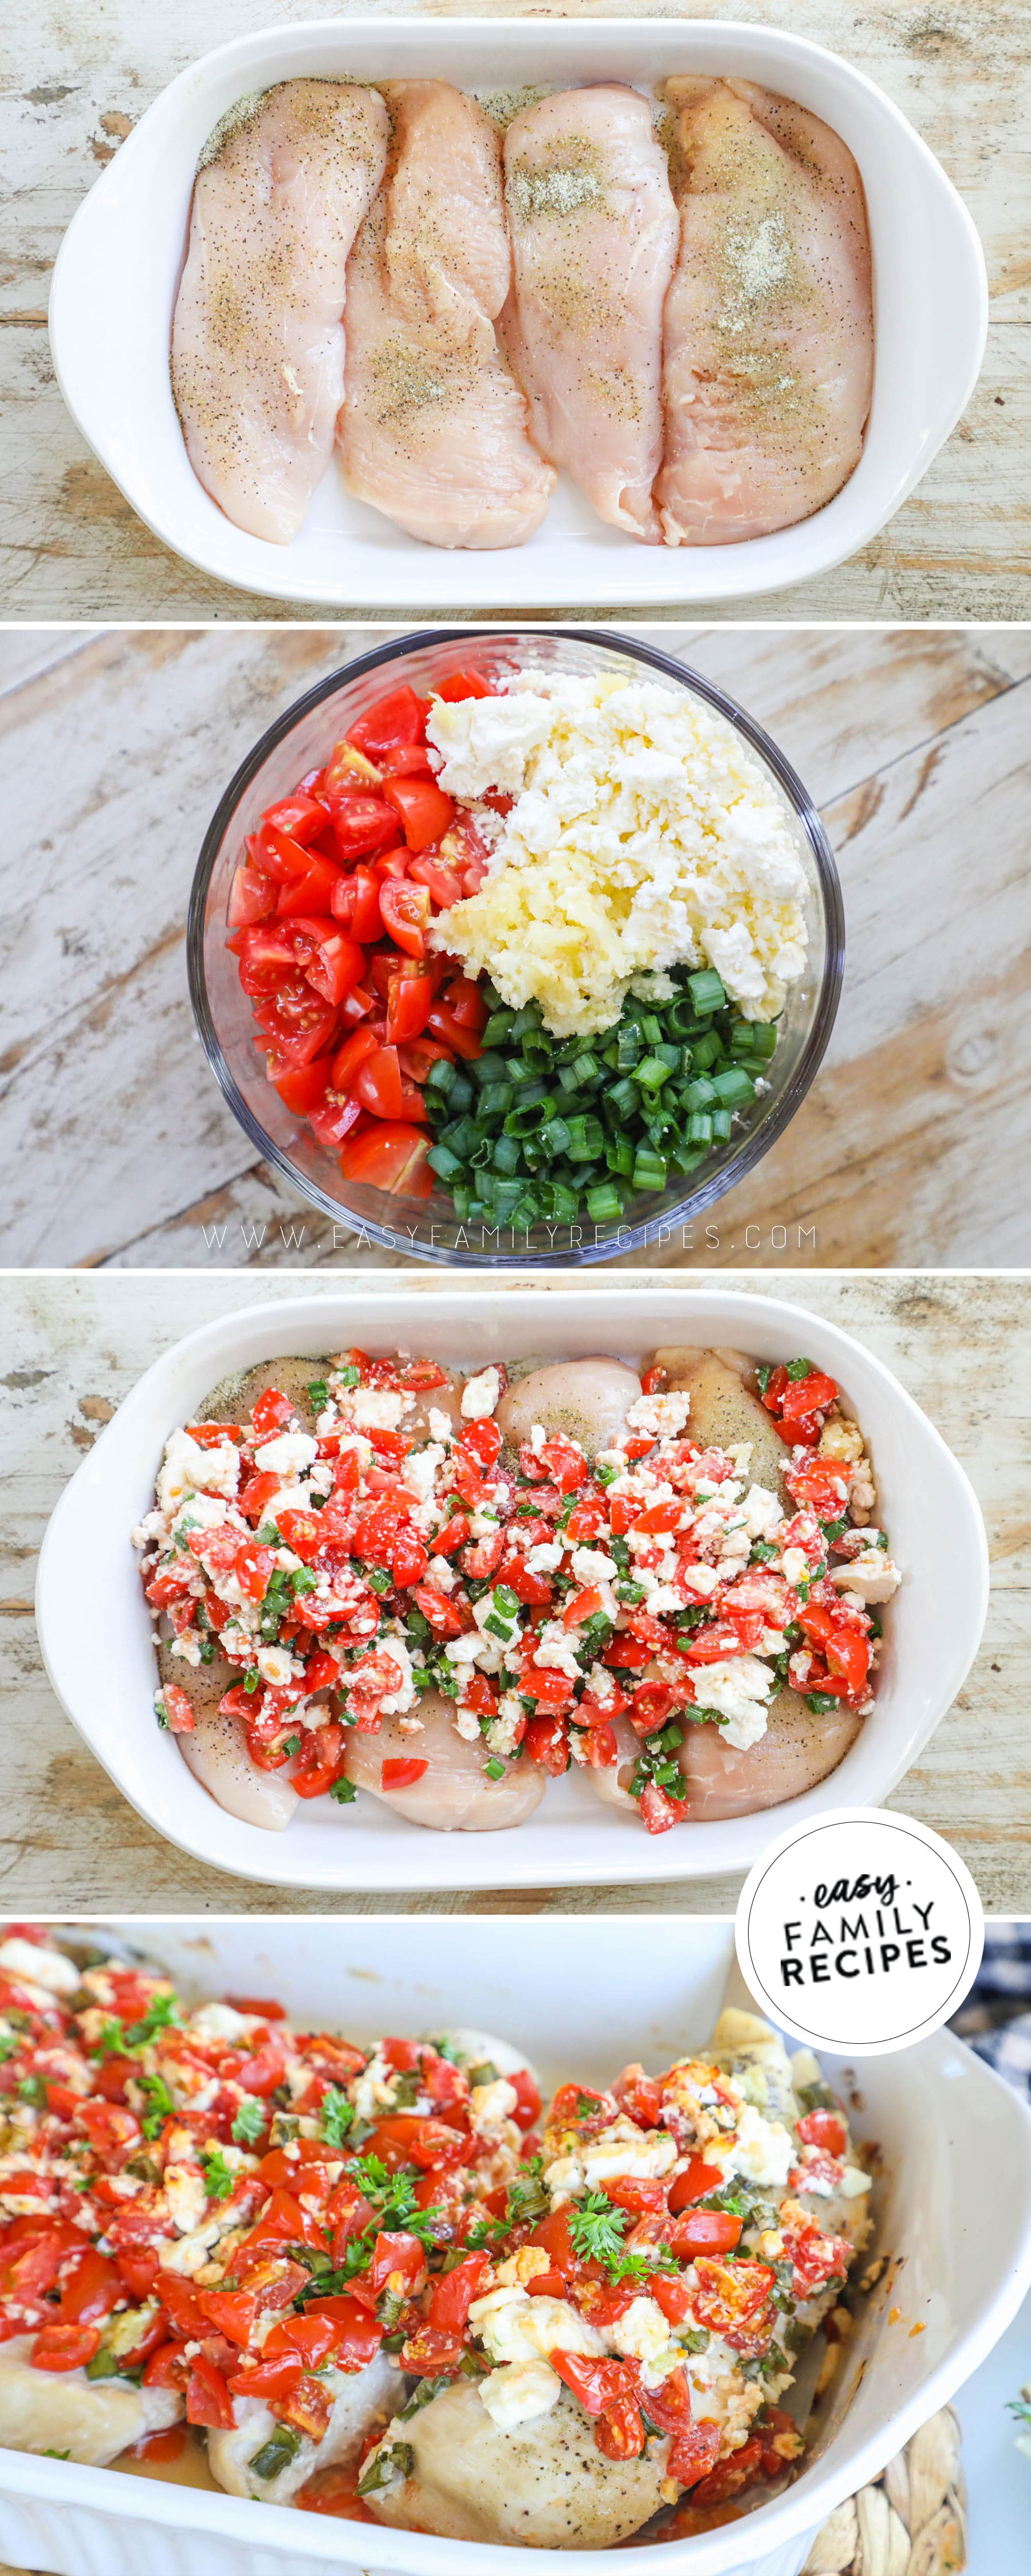 Step by step image of how to make feta tomato chicken. 1) lay chicken breast flat in pan 2) mix tomato, feta, green onion, garlic, and seasoning together in a bowl 3) spoon mixture over chicken breast 4) bake and enjoy!